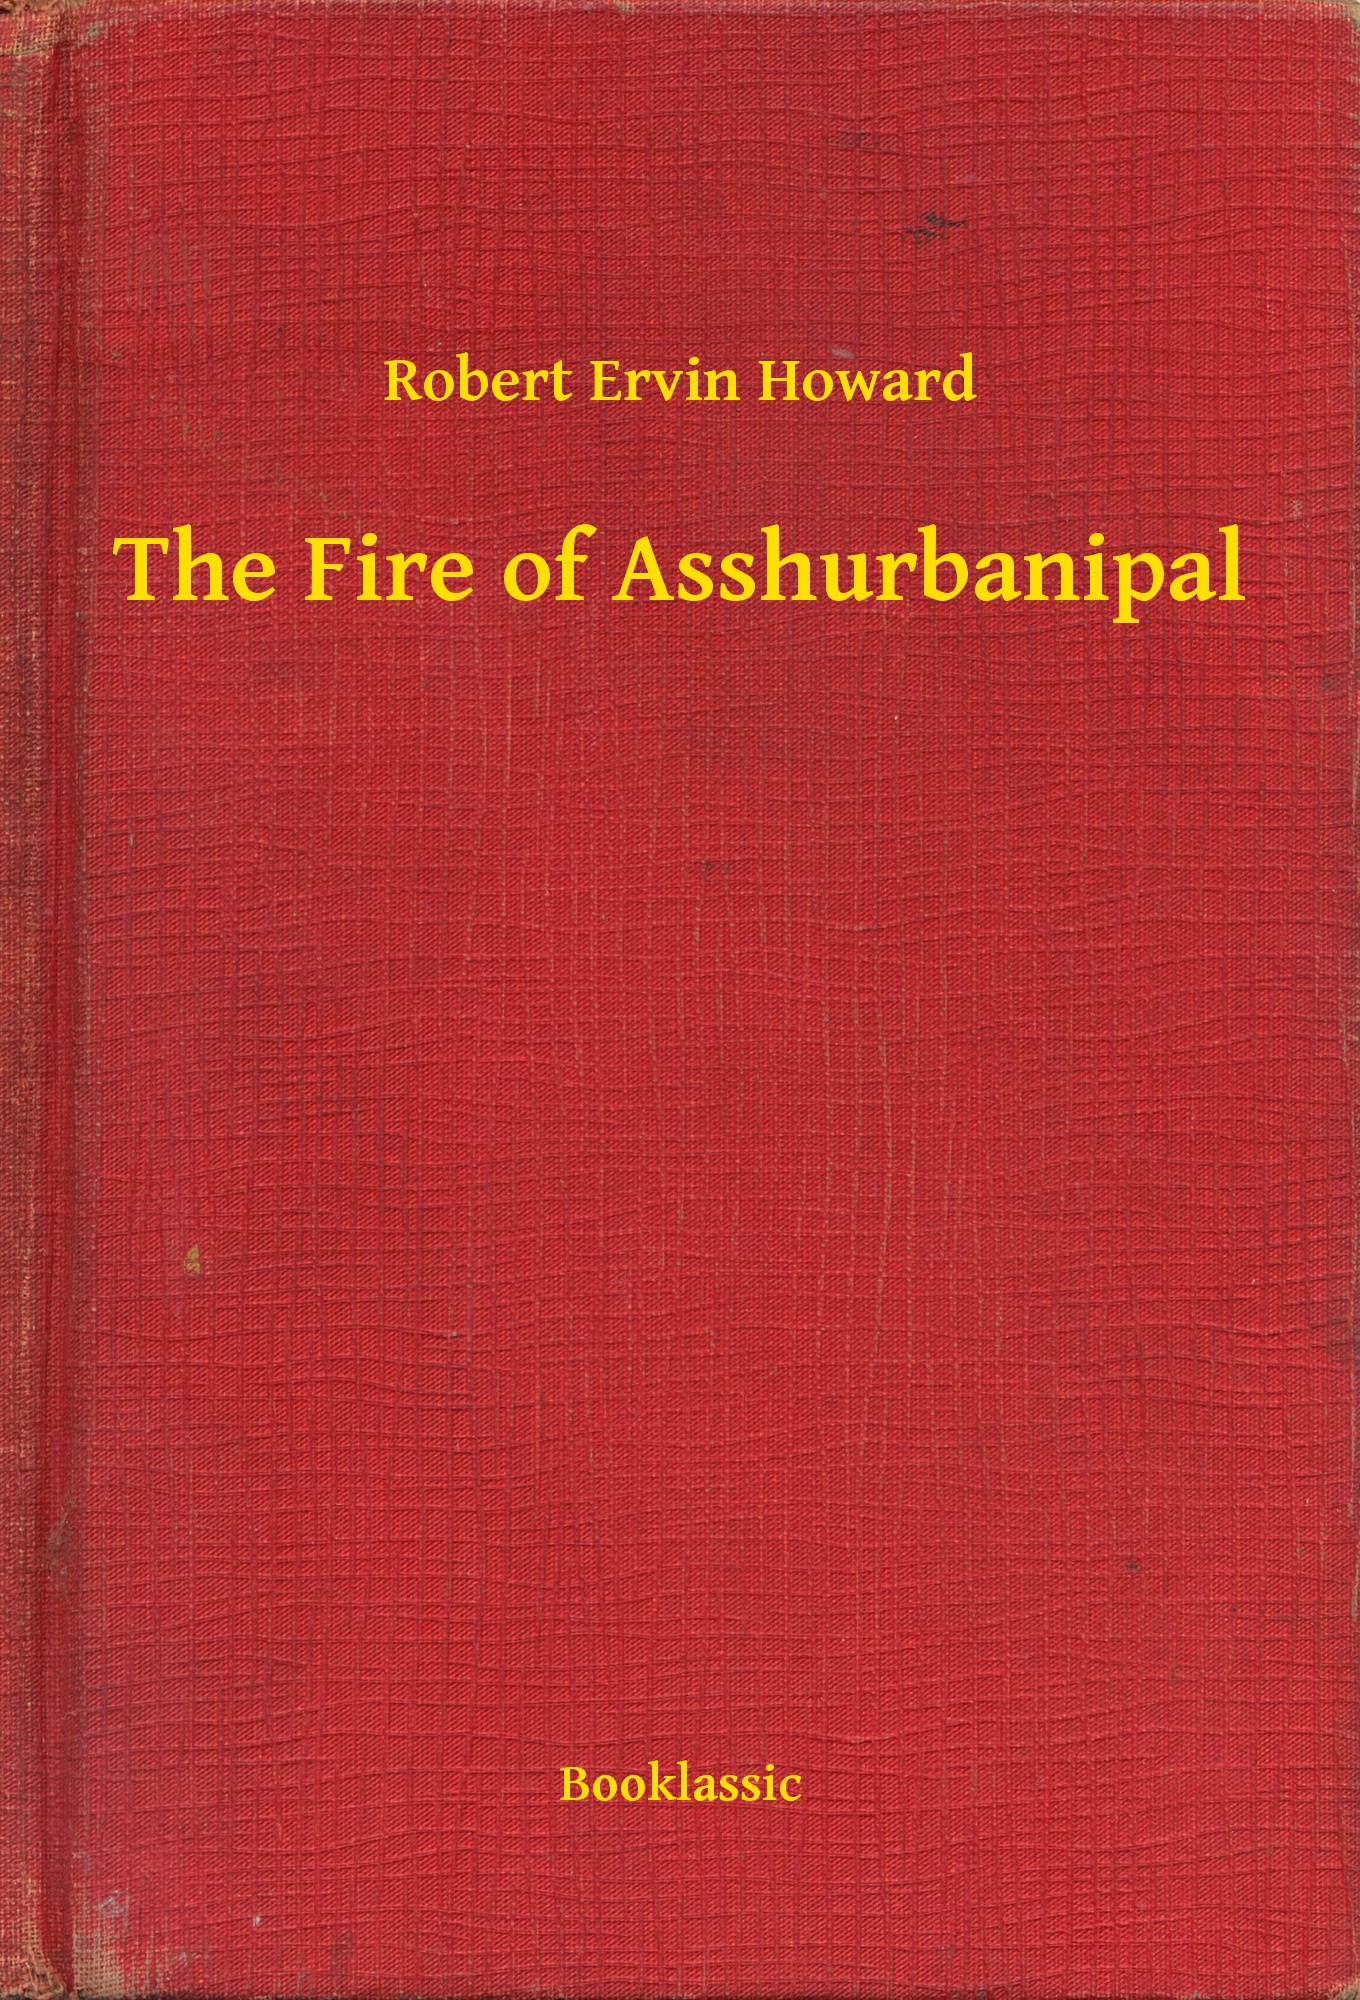 The Fire of Asshurbanipal